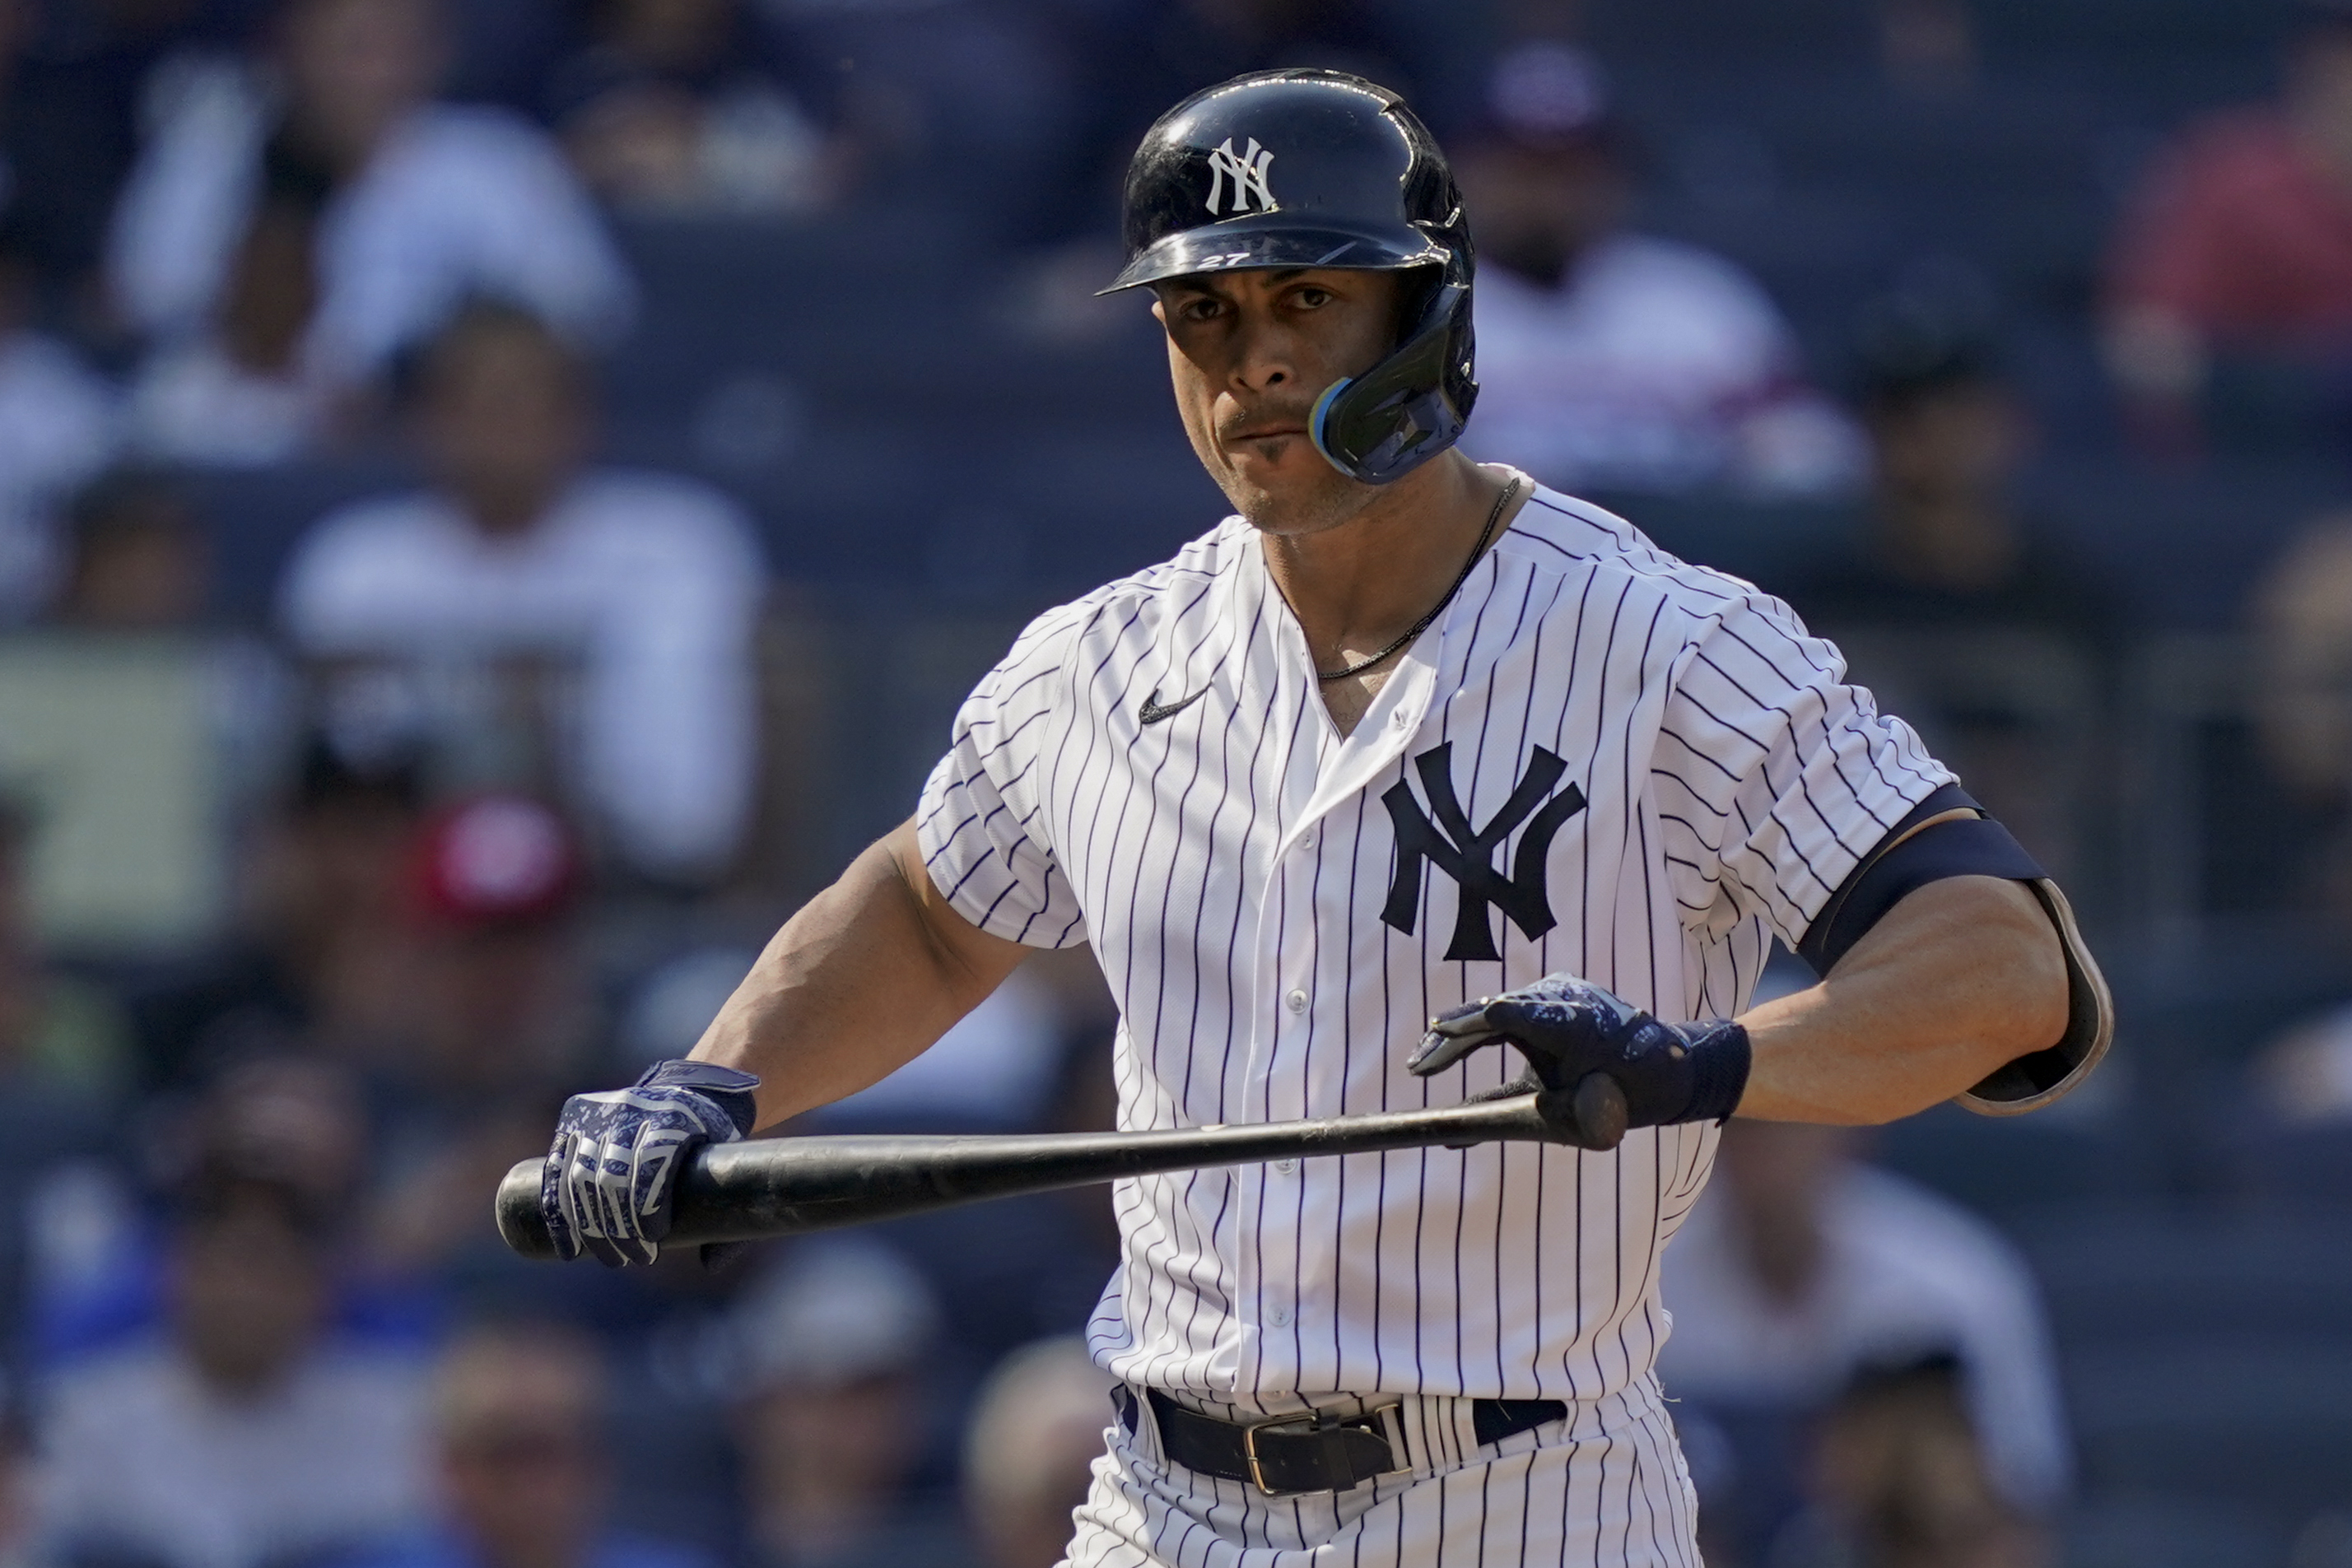 Giancarlo Stanton was a force in the Yankees lineup in 2021